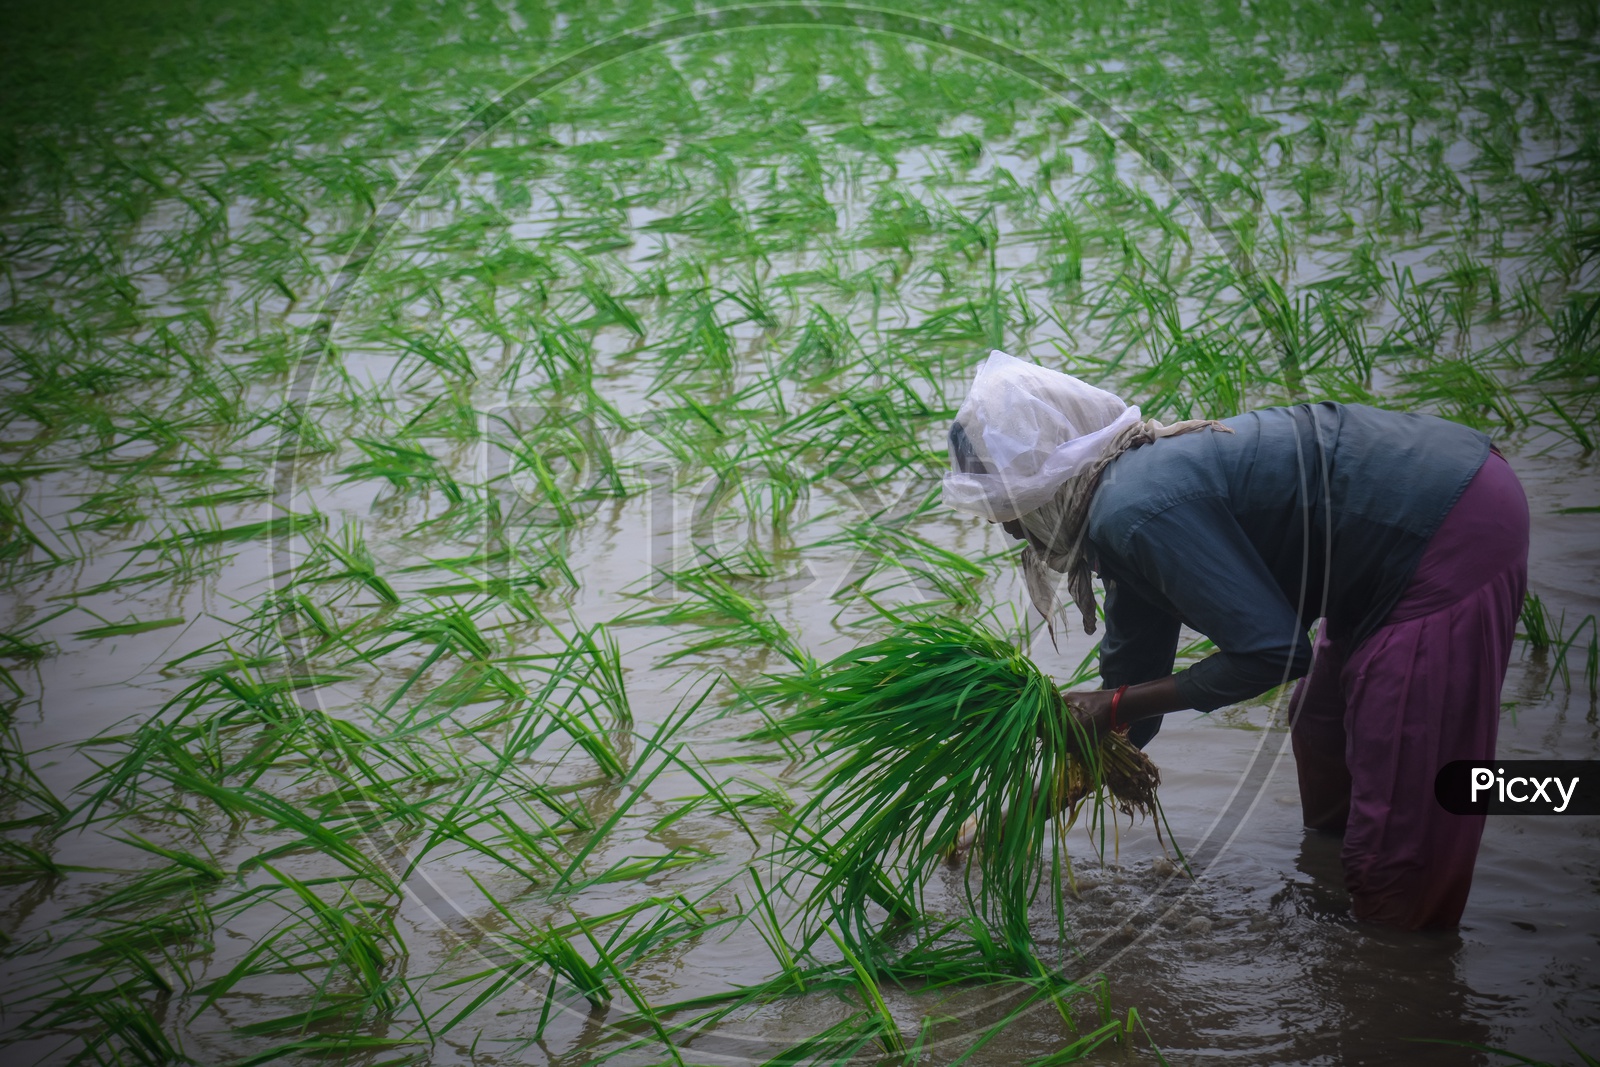 A Woman working In a Paddy Field